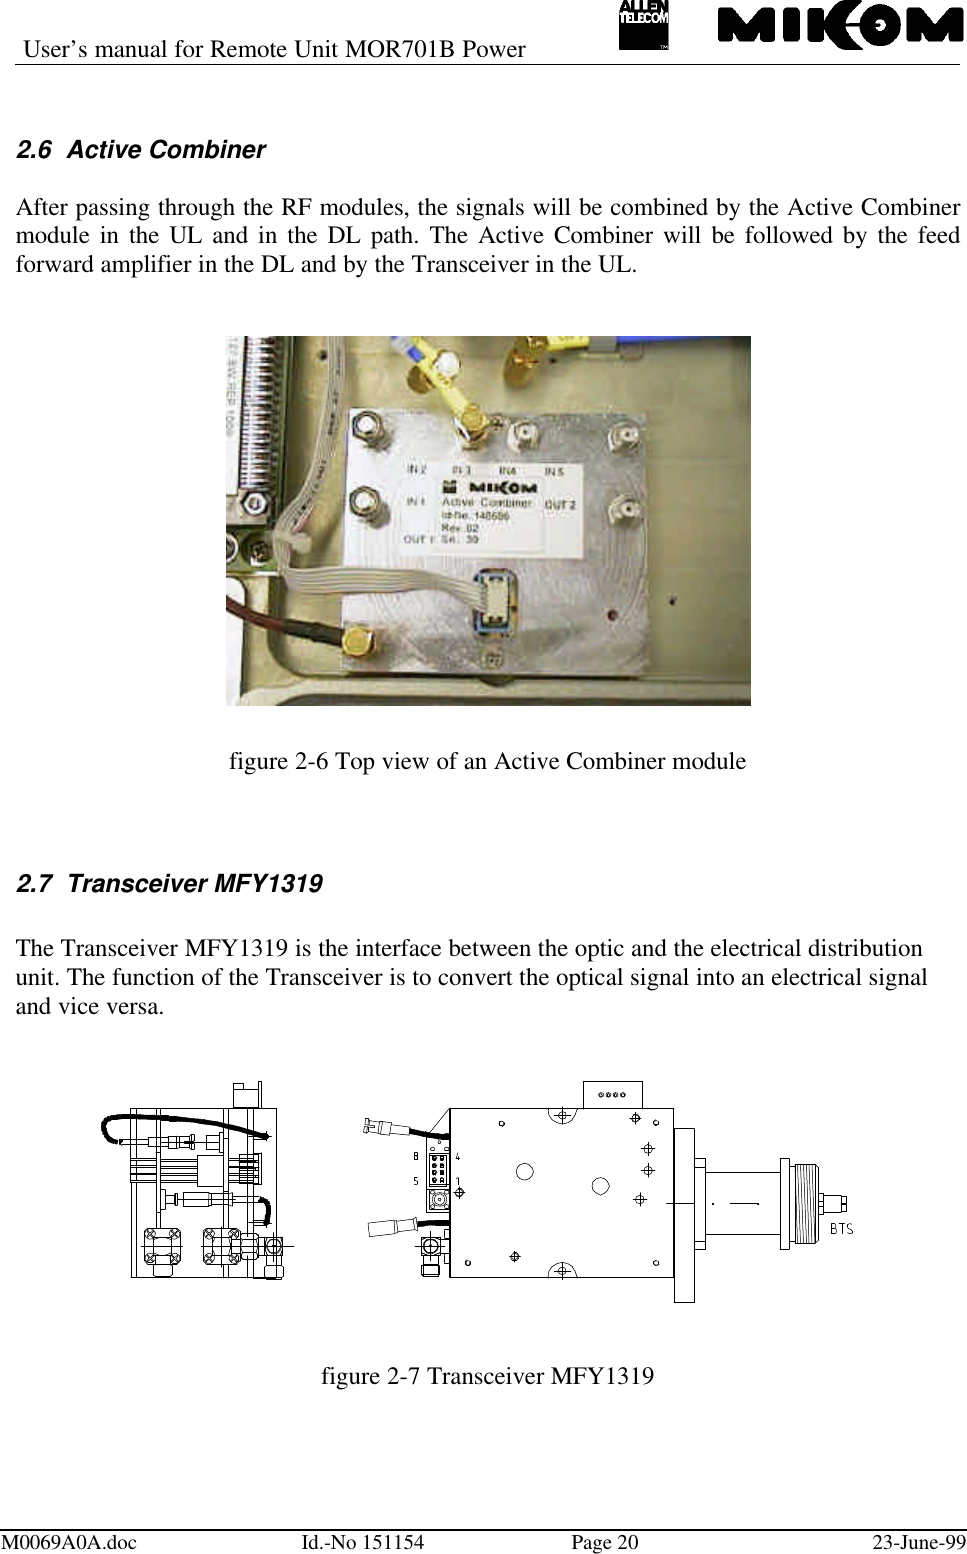 User’s manual for Remote Unit MOR701B PowerM0069A0A.doc Id.-No 151154 Page 20 23-June-992.6 Active CombinerAfter passing through the RF modules, the signals will be combined by the Active Combinermodule in the UL and in the DL path. The Active Combiner will be followed by the feedforward amplifier in the DL and by the Transceiver in the UL.figure 2-6 Top view of an Active Combiner module2.7 Transceiver MFY1319The Transceiver MFY1319 is the interface between the optic and the electrical distributionunit. The function of the Transceiver is to convert the optical signal into an electrical signaland vice versa.figure 2-7 Transceiver MFY1319